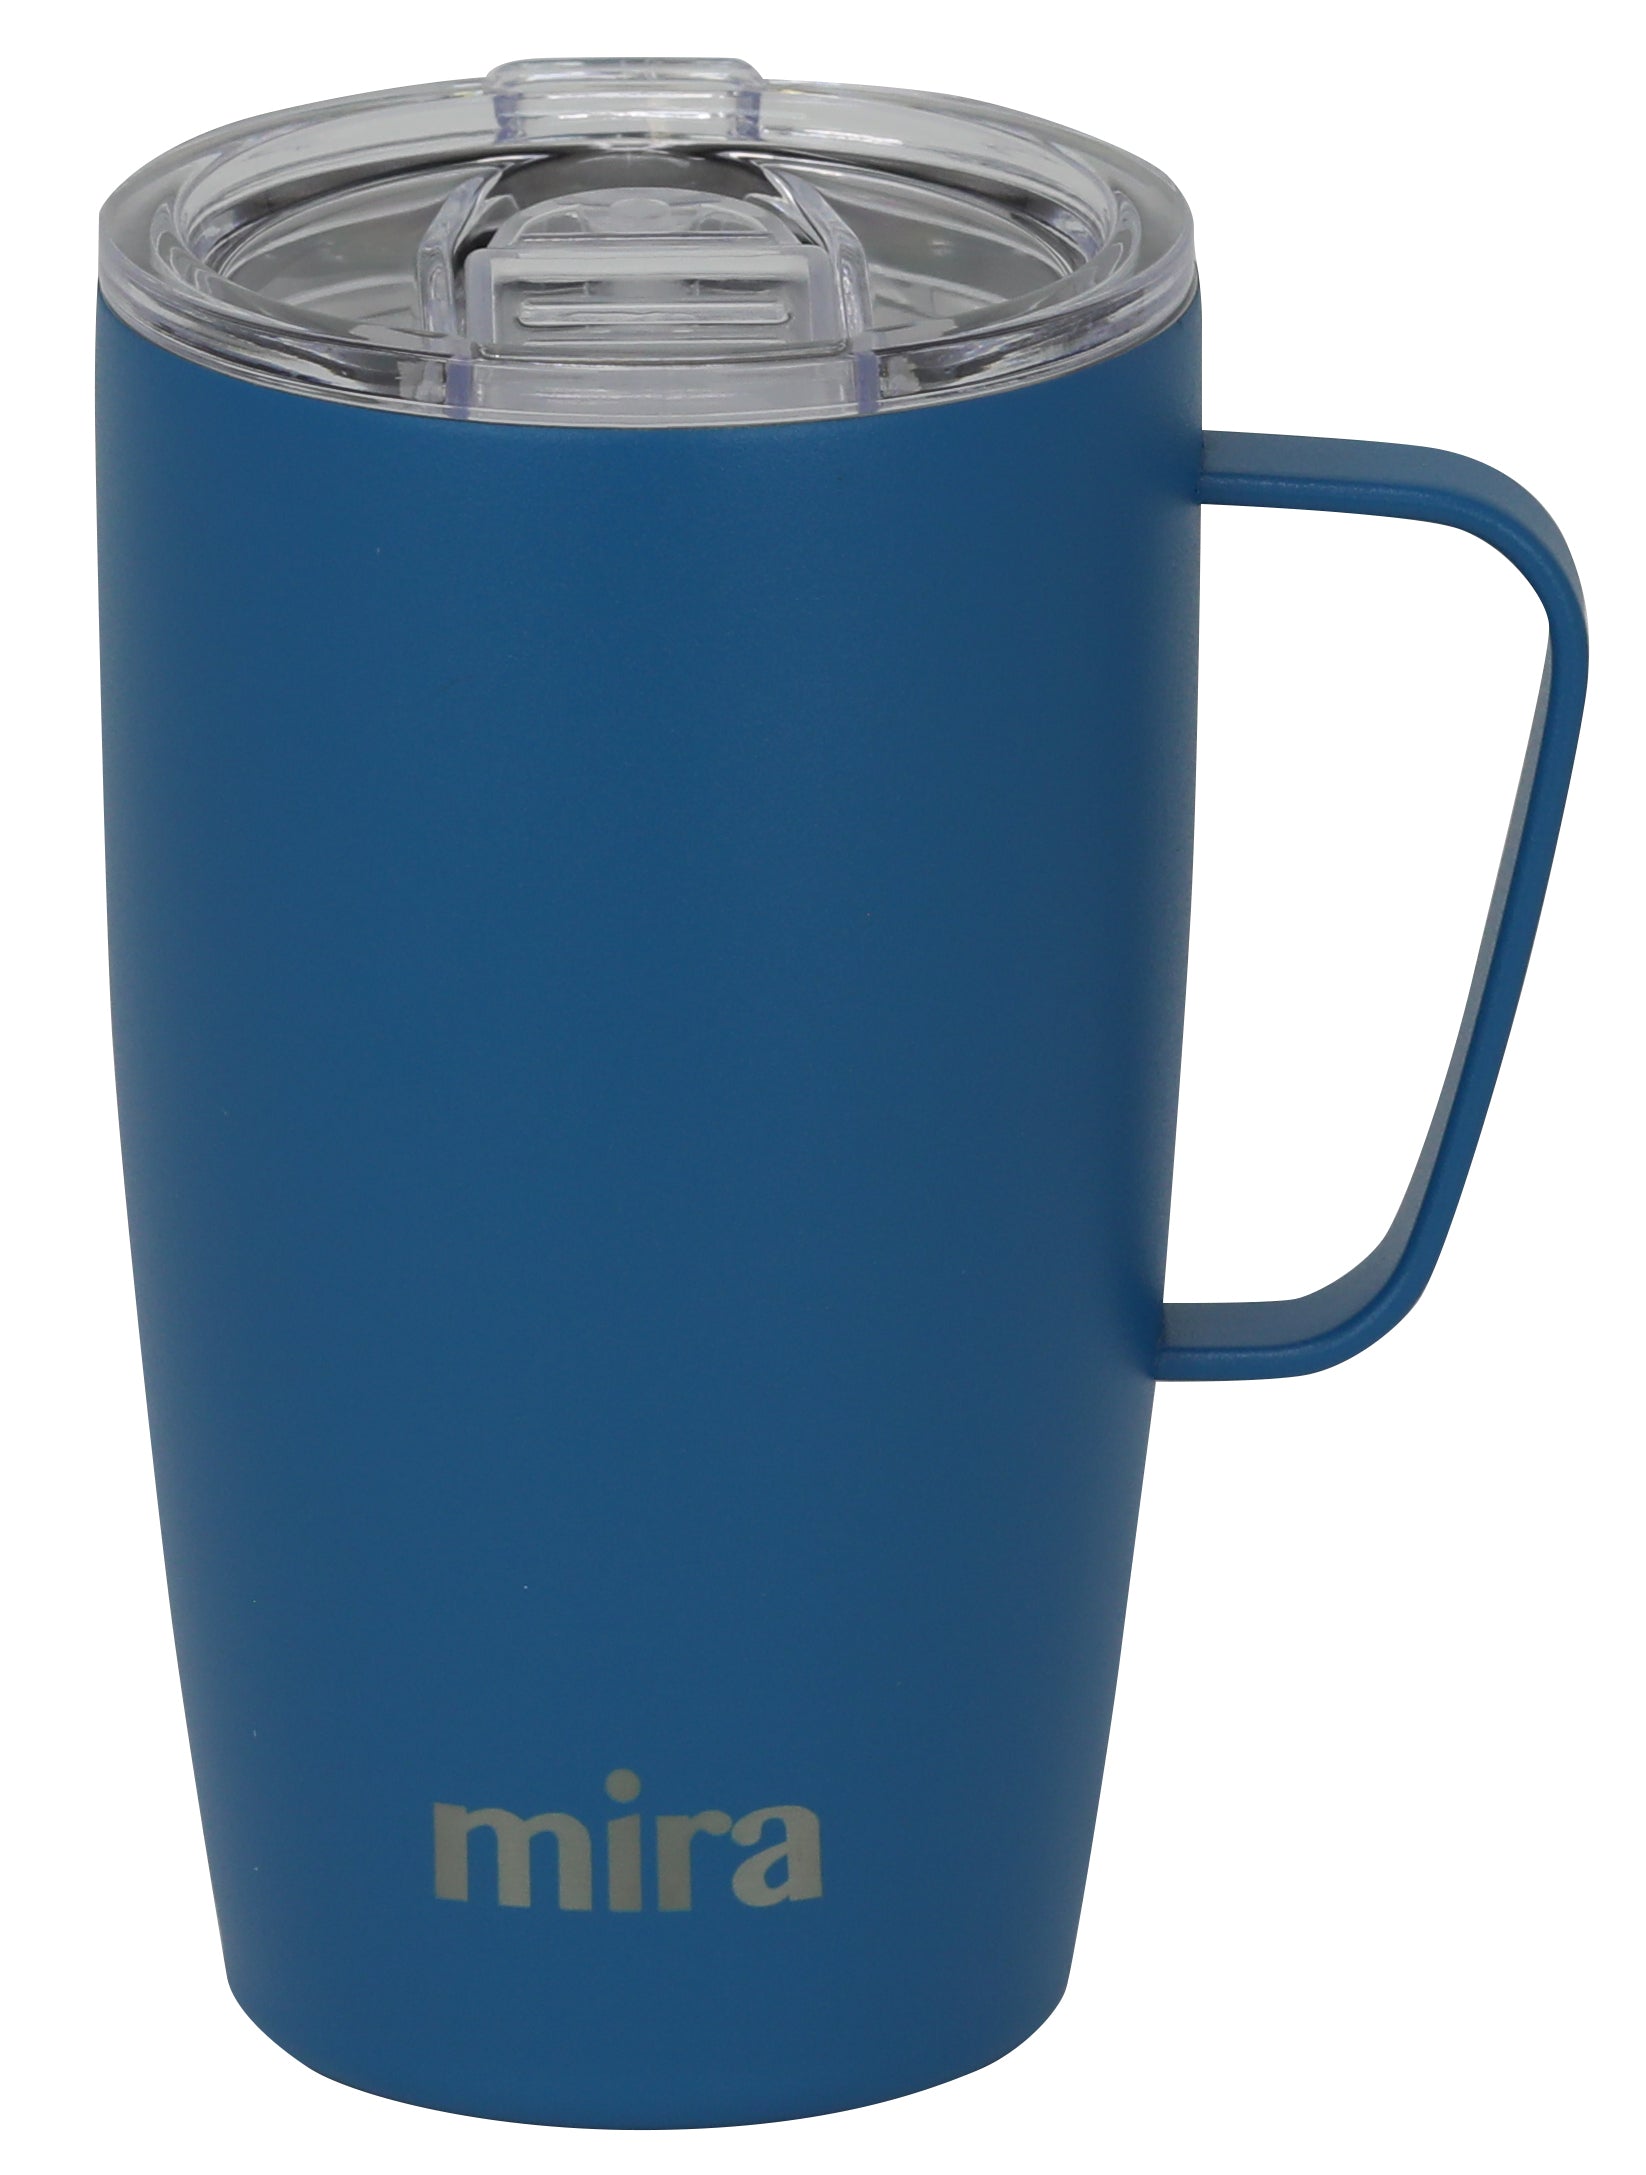 Insulated cup, no-spill lid 8 oz.